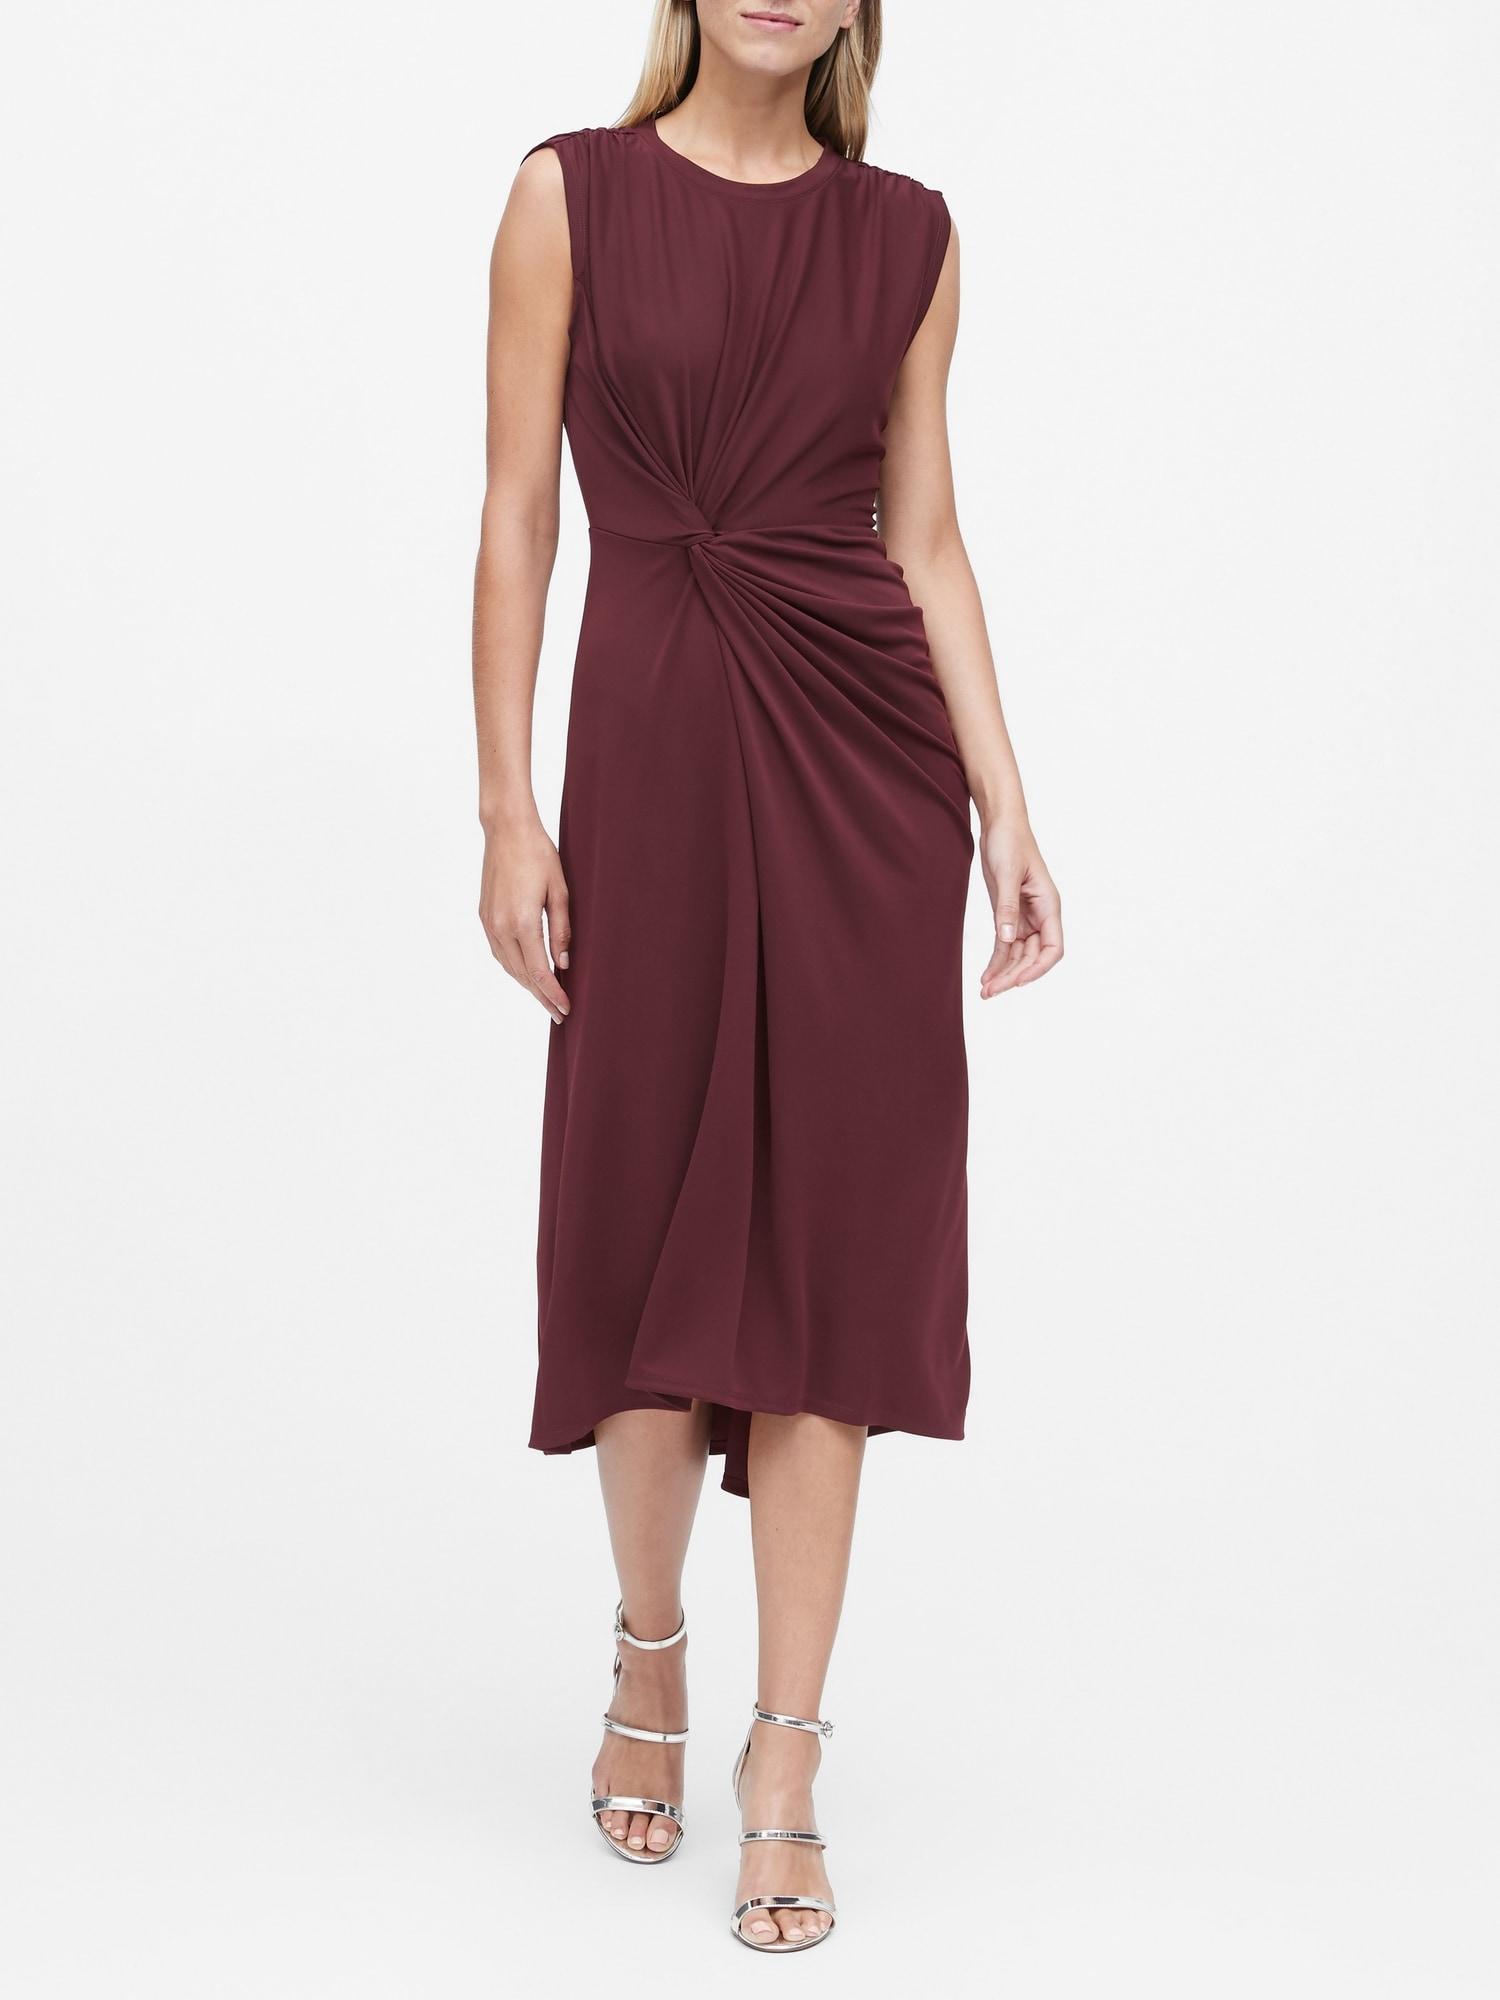 Banana Republic Twist-front Midi Dress in Burgundy Red (Red) - Save 26%